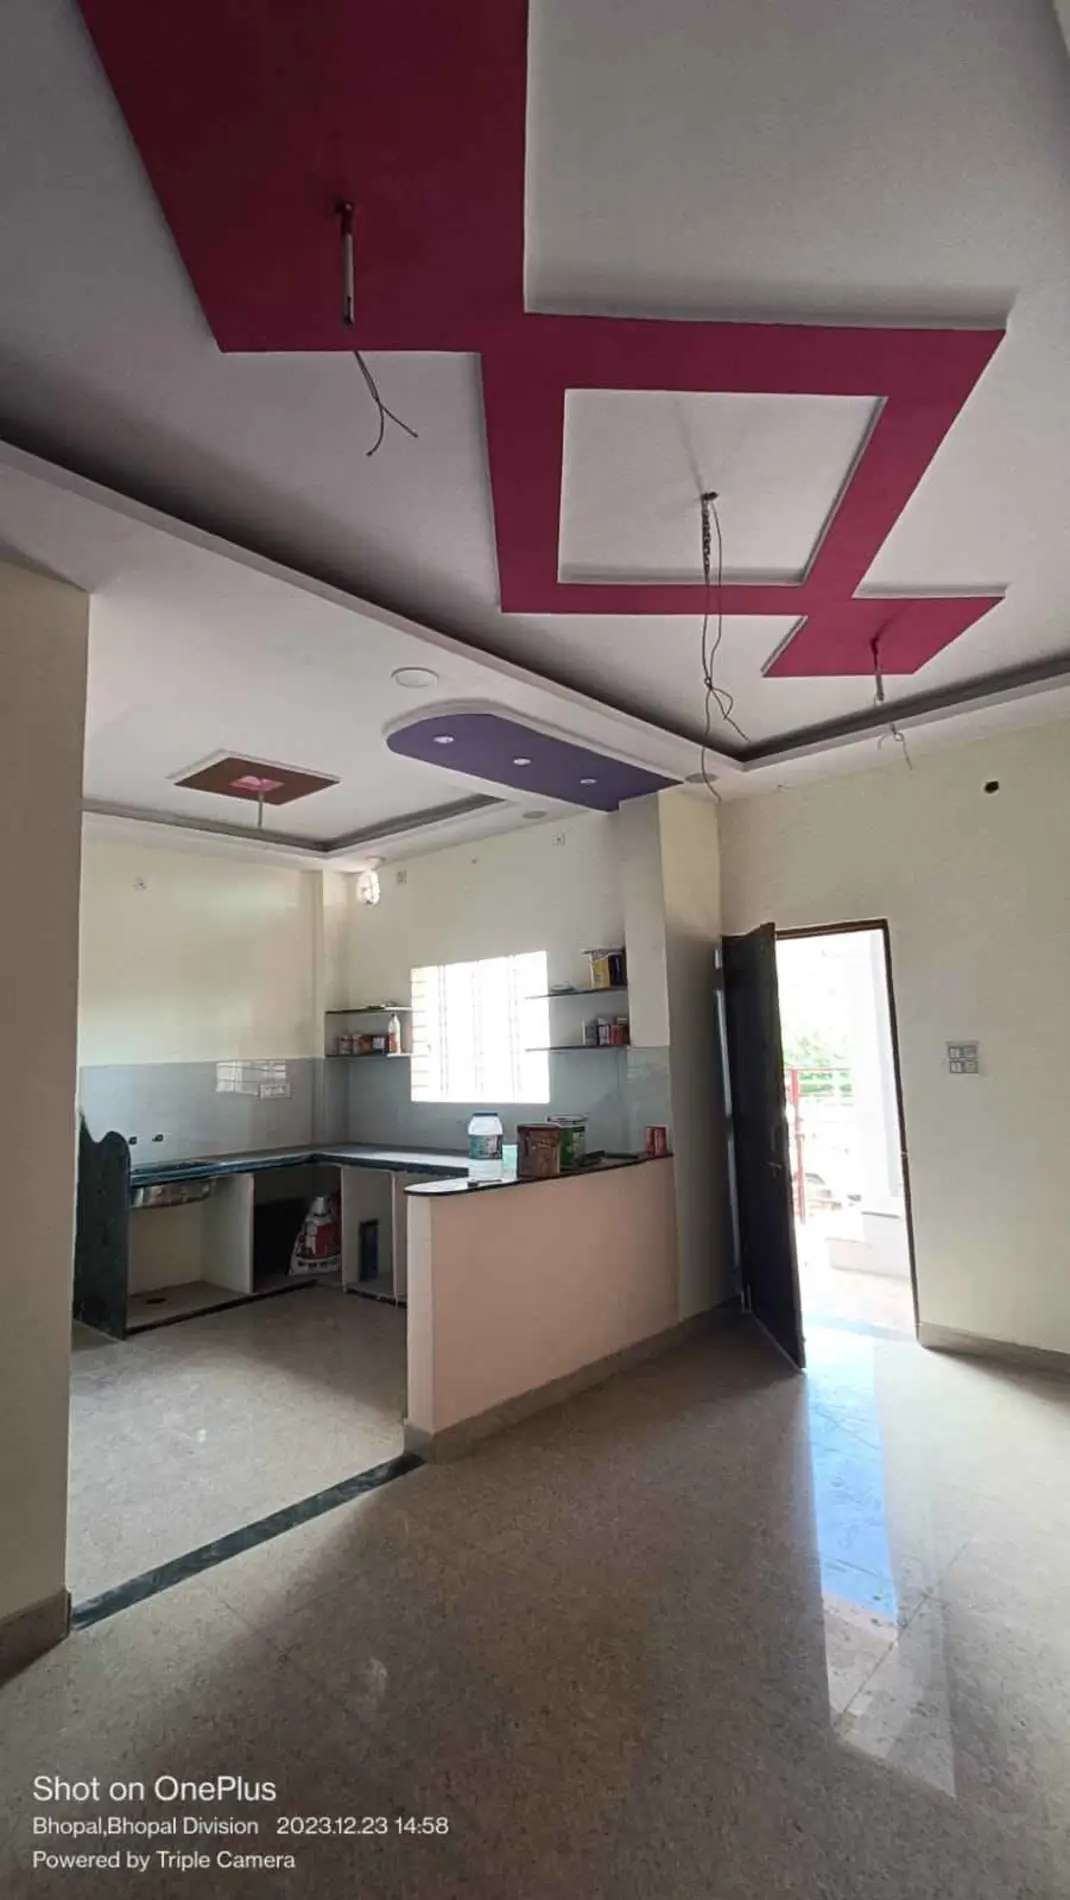 4 Bed/ 4 Bath Sell House/ Bungalow/ Villa; 800 sq. ft. lot for sale @Ayodhya bypass road  sector f Bhopal